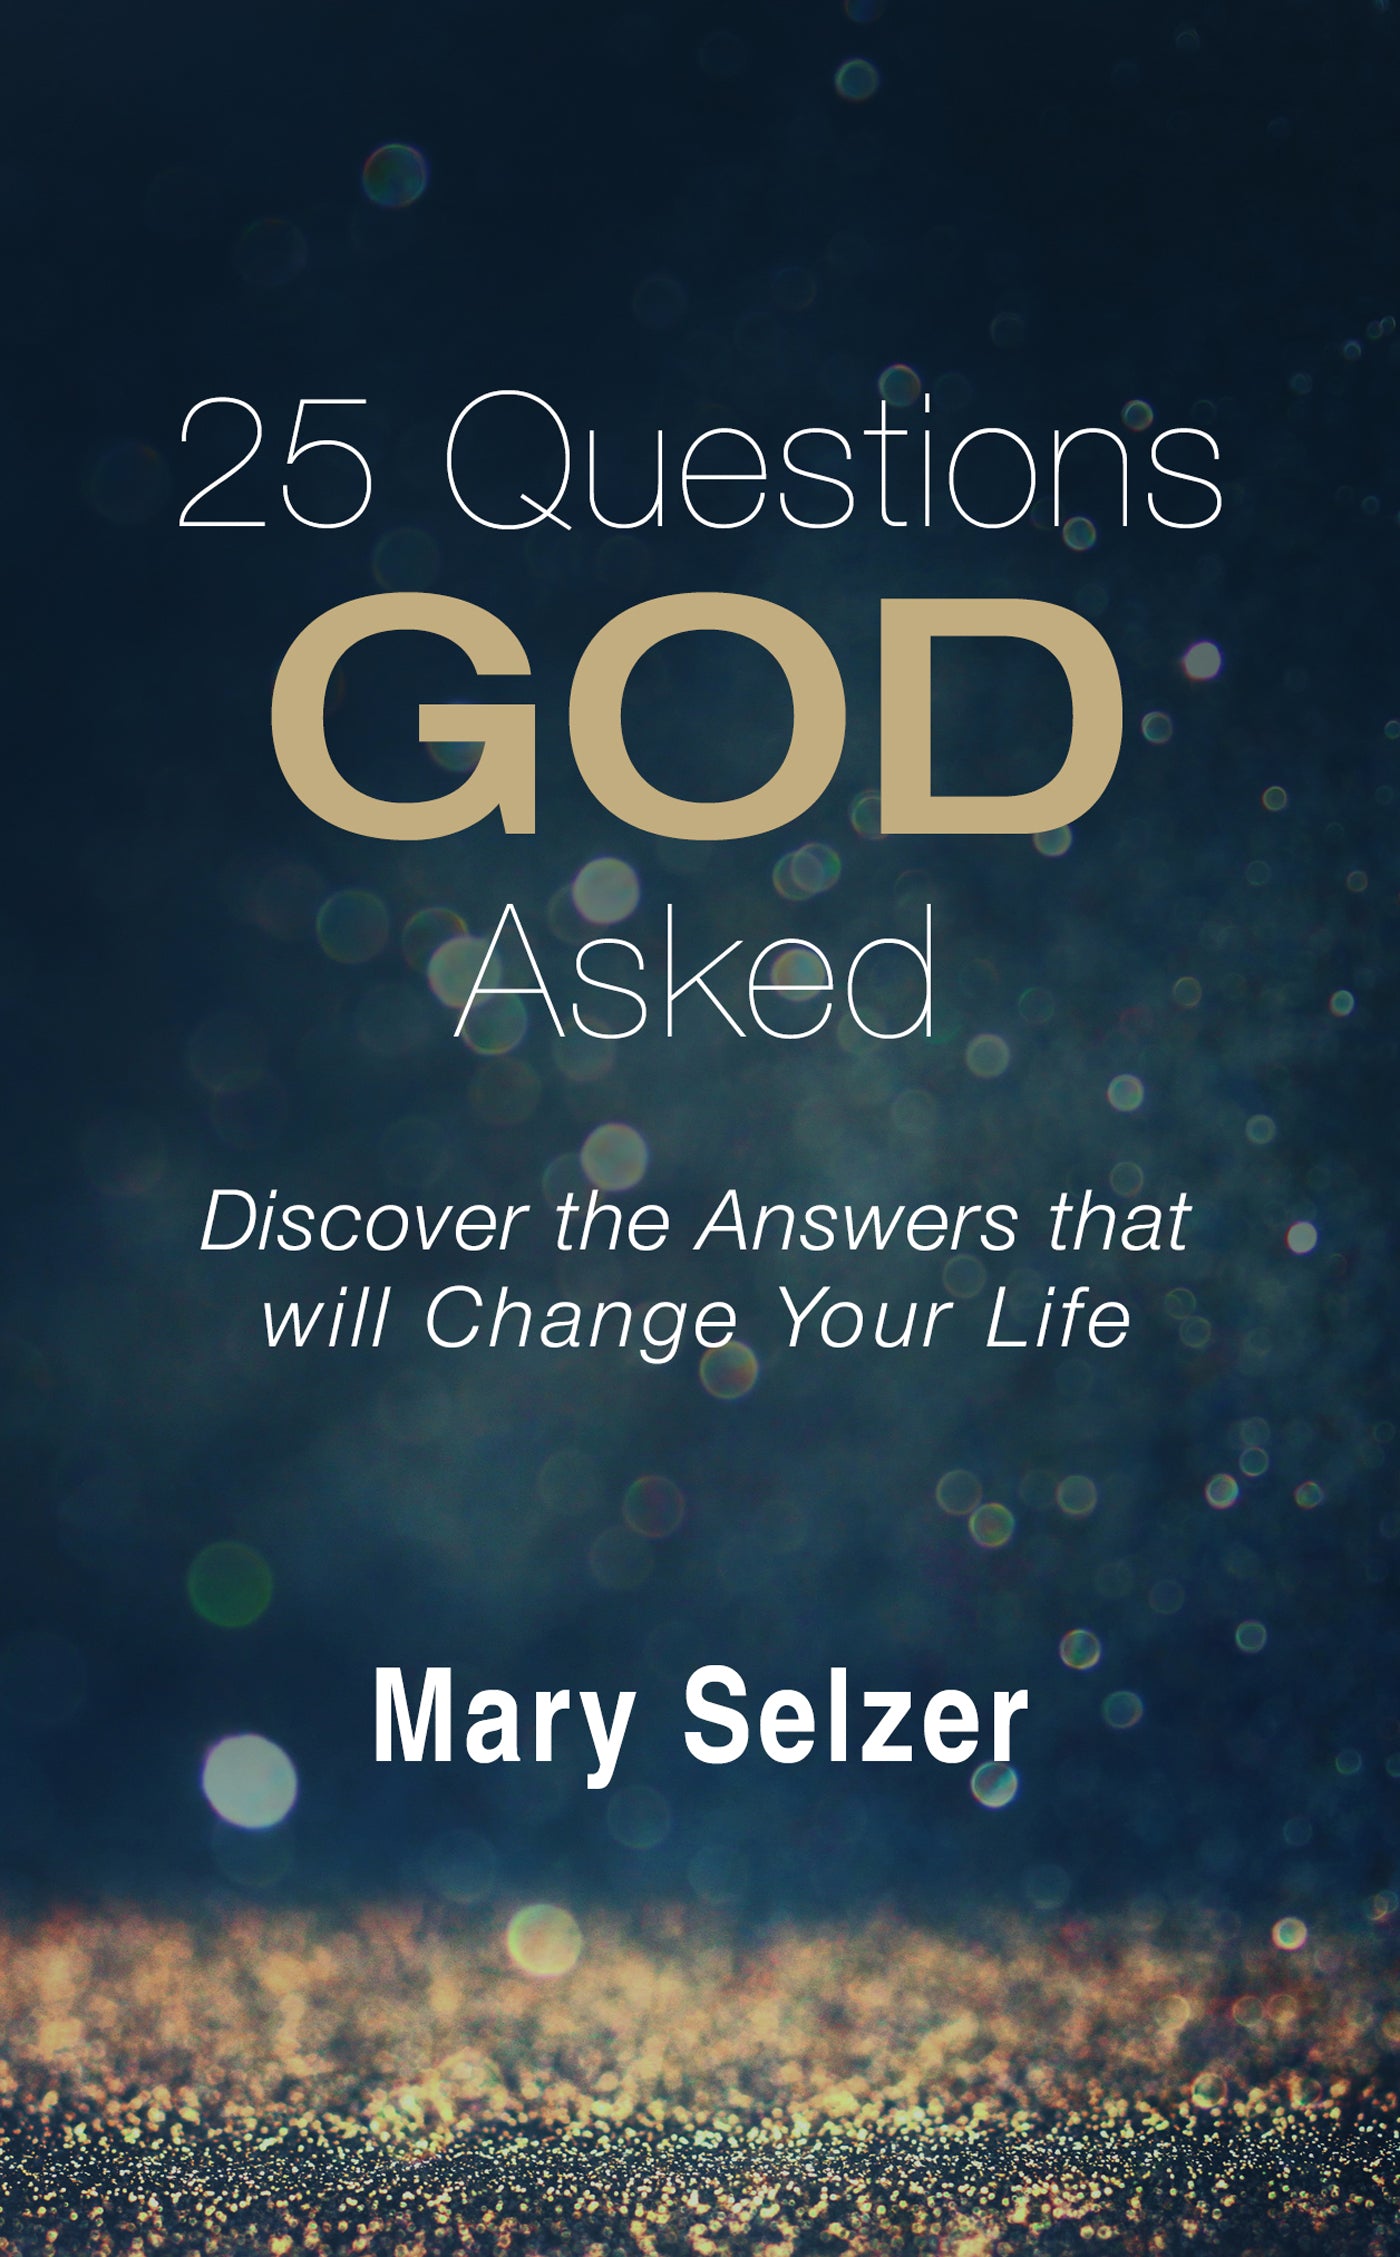 25 Questions God Asked - The Christian Gift Company